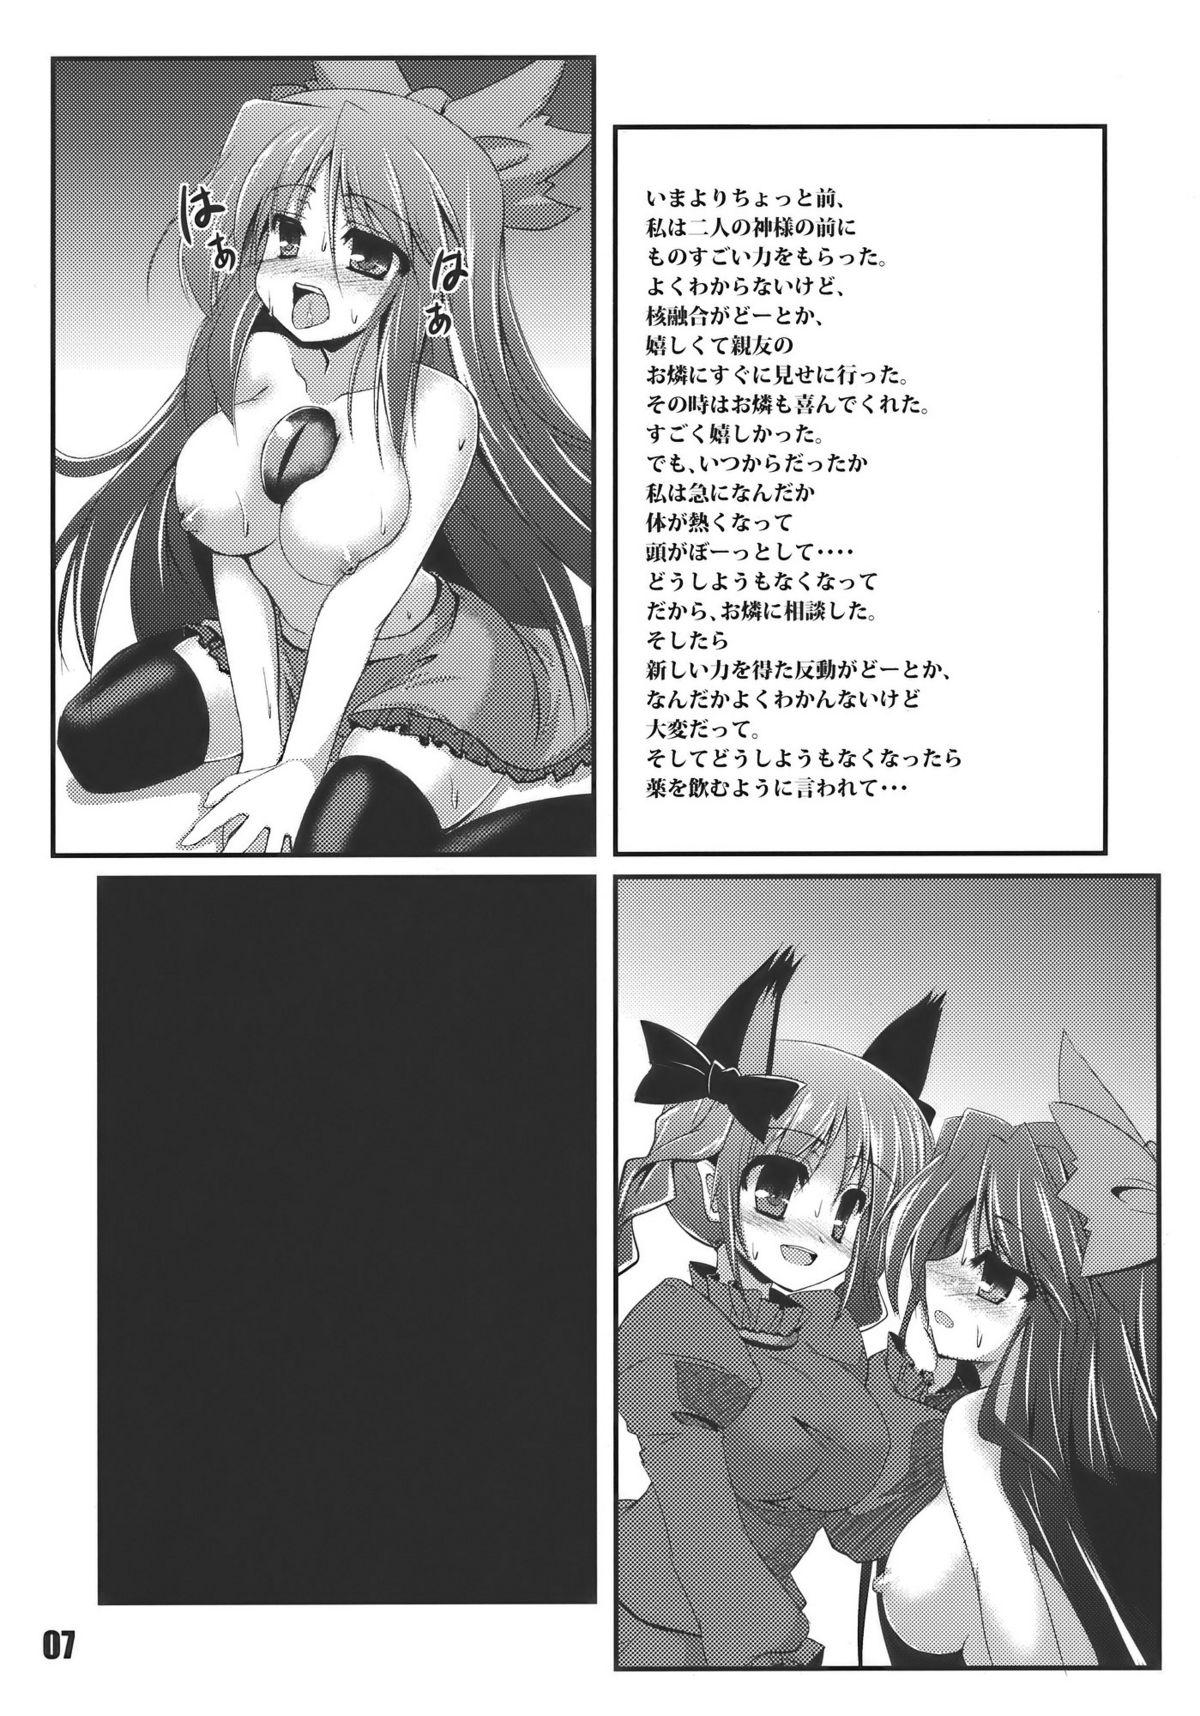 Animation Febrile Disease - Touhou project Shaking - Page 7